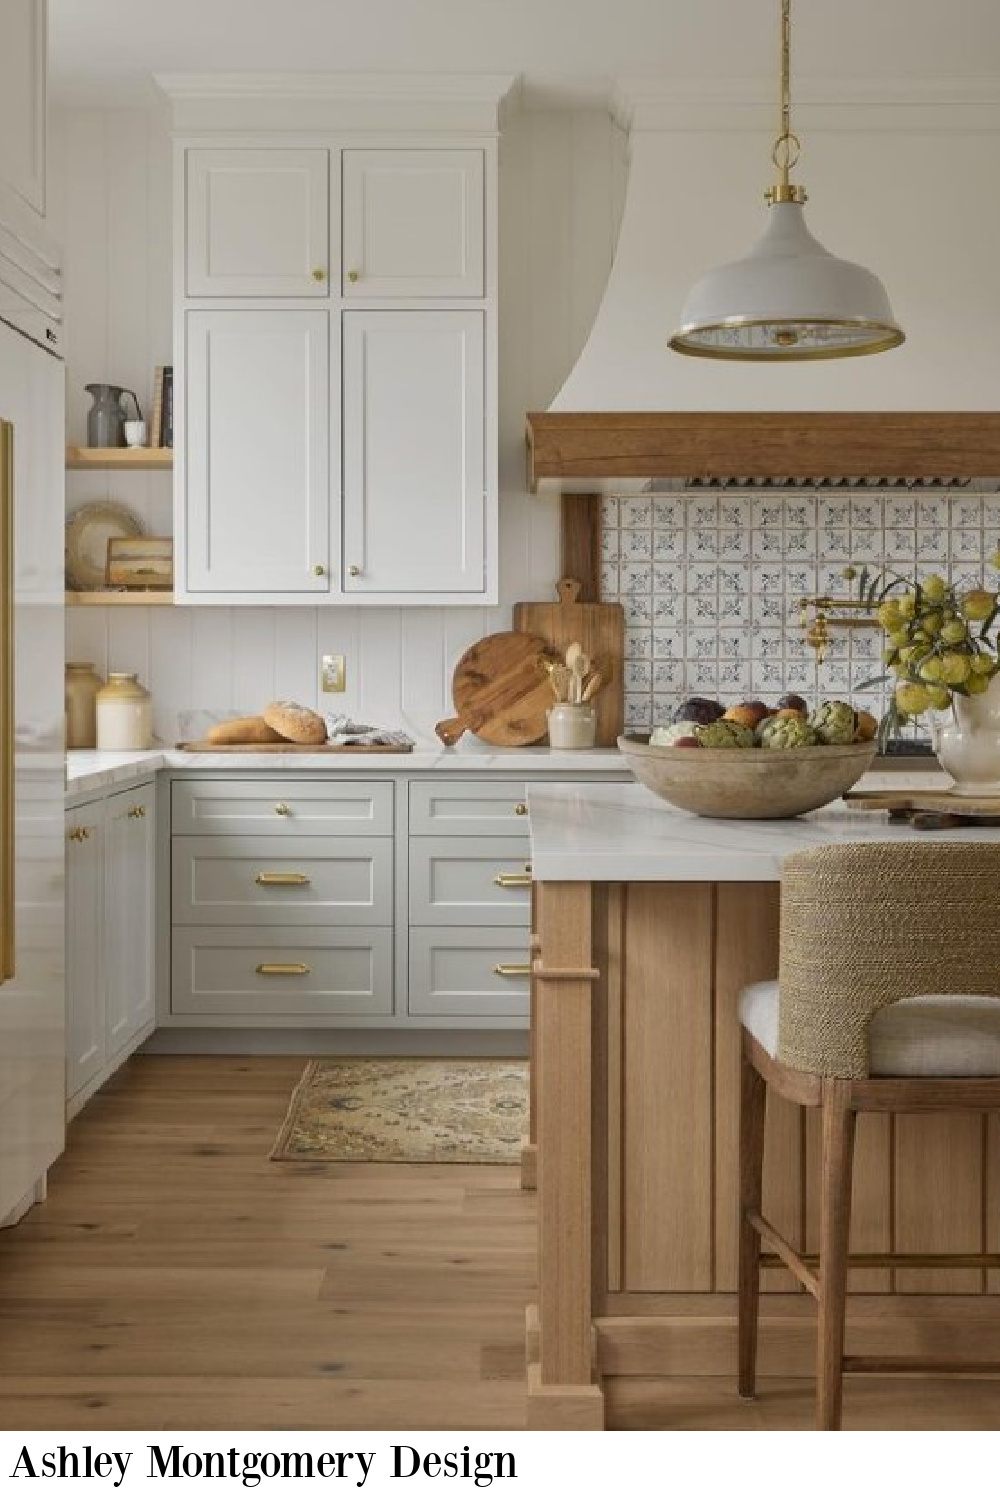 Beautiful timeless natural kitchen by Ashley Montgomery Design. #timelesskitchens